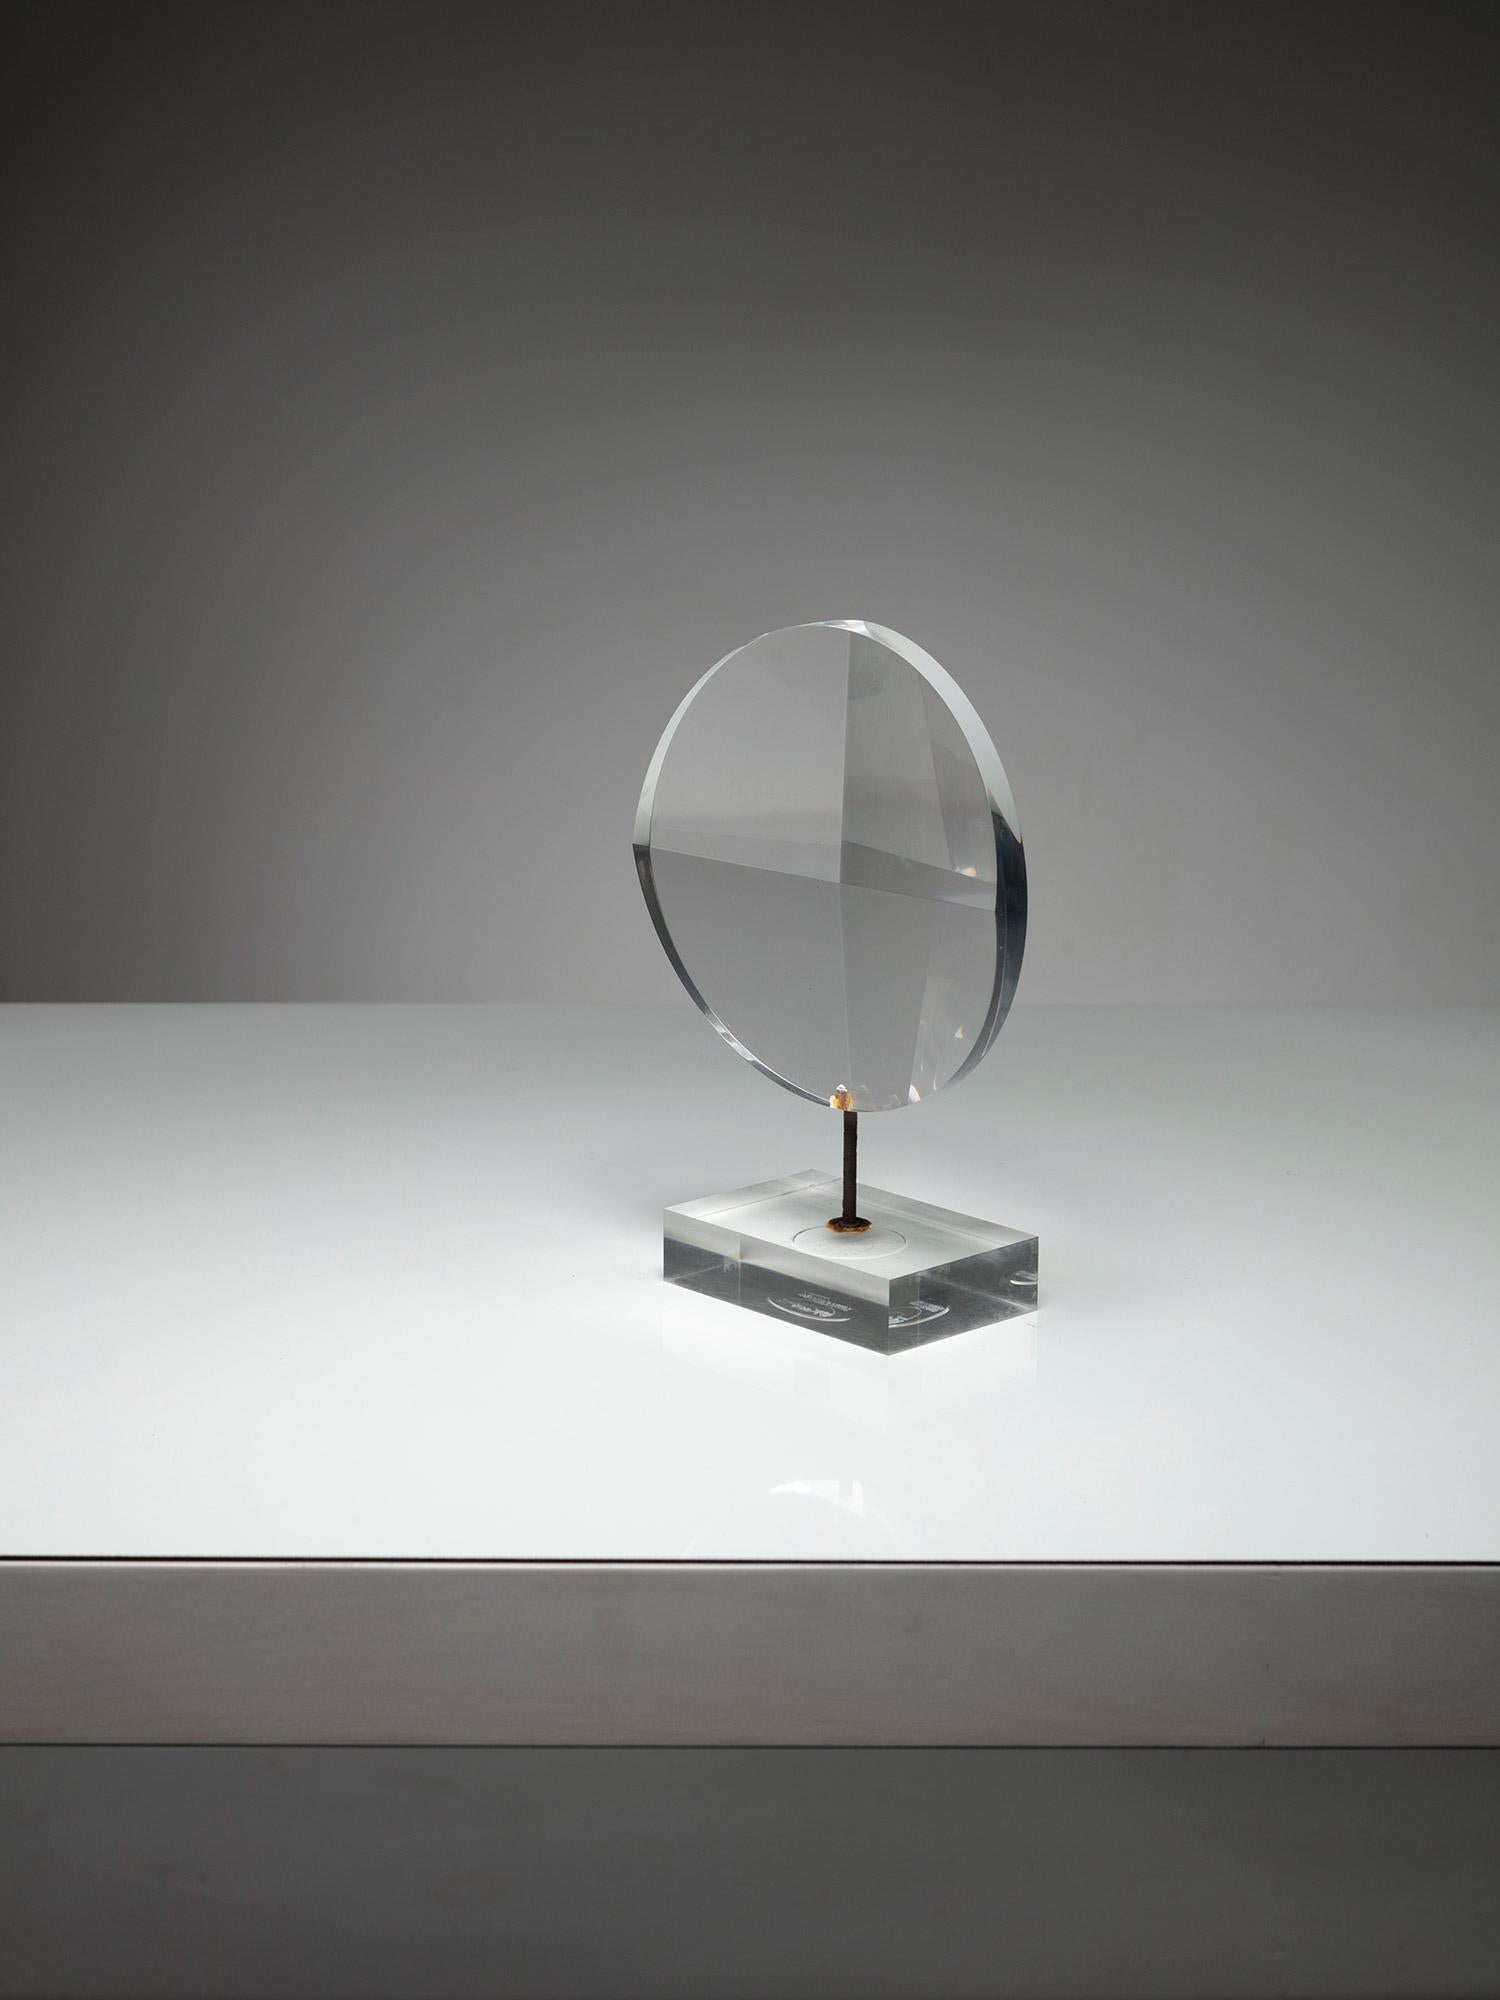 Remarkable optical sculpture by Alessio Tasca for Fusina.
Circular shape with cut faces generating endless refractions.